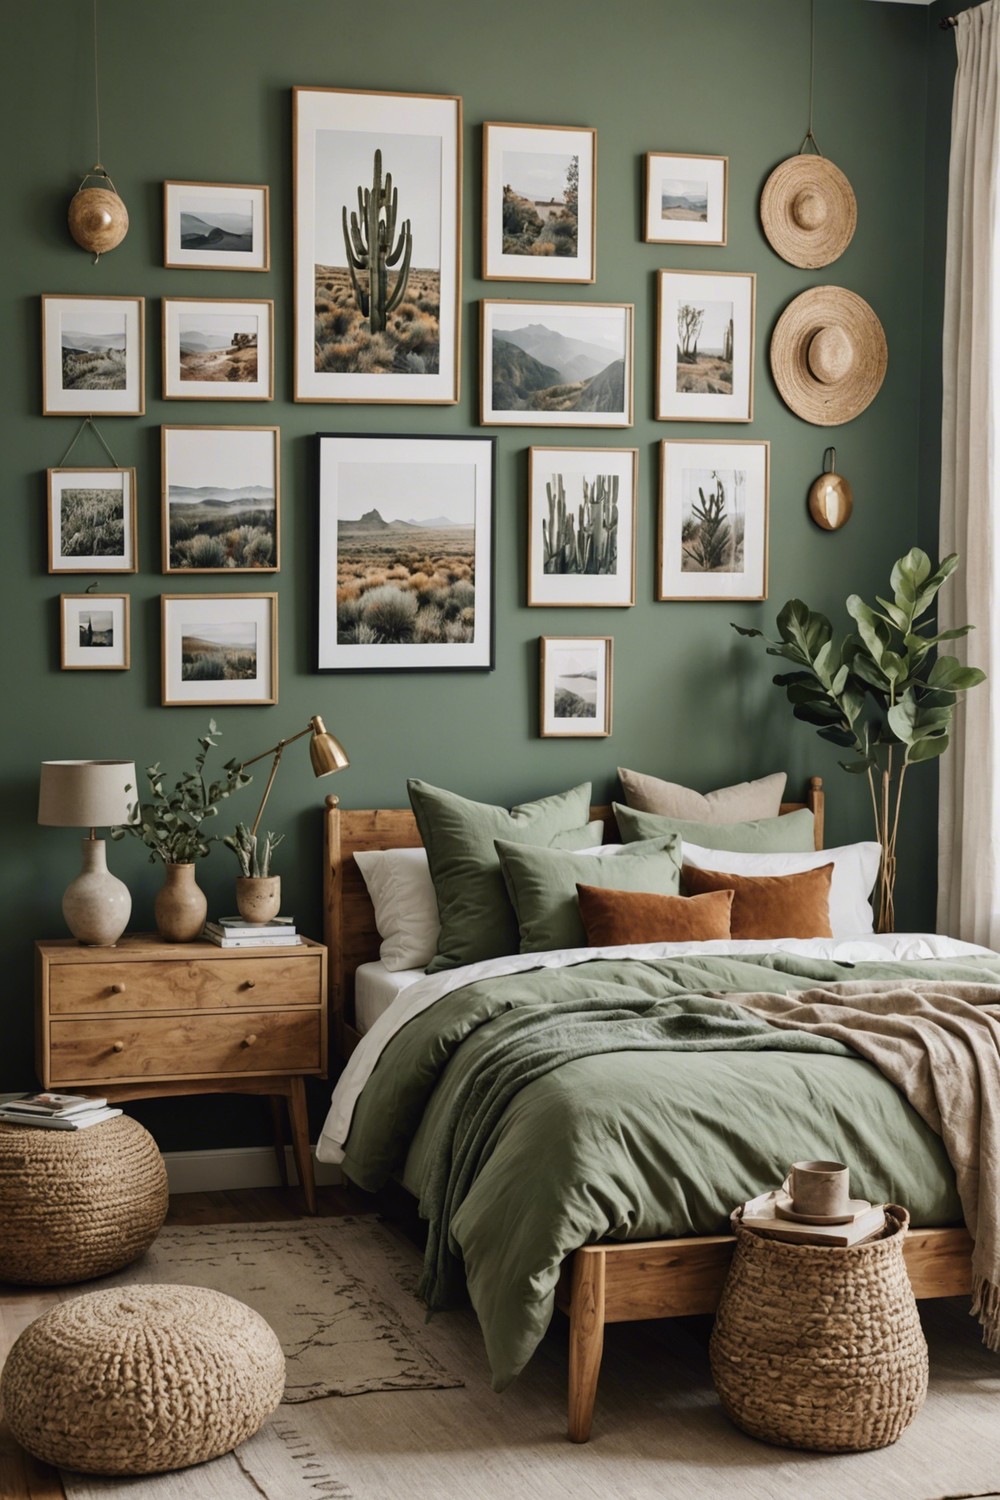 Incorporate Sage Green into a Gallery Wall